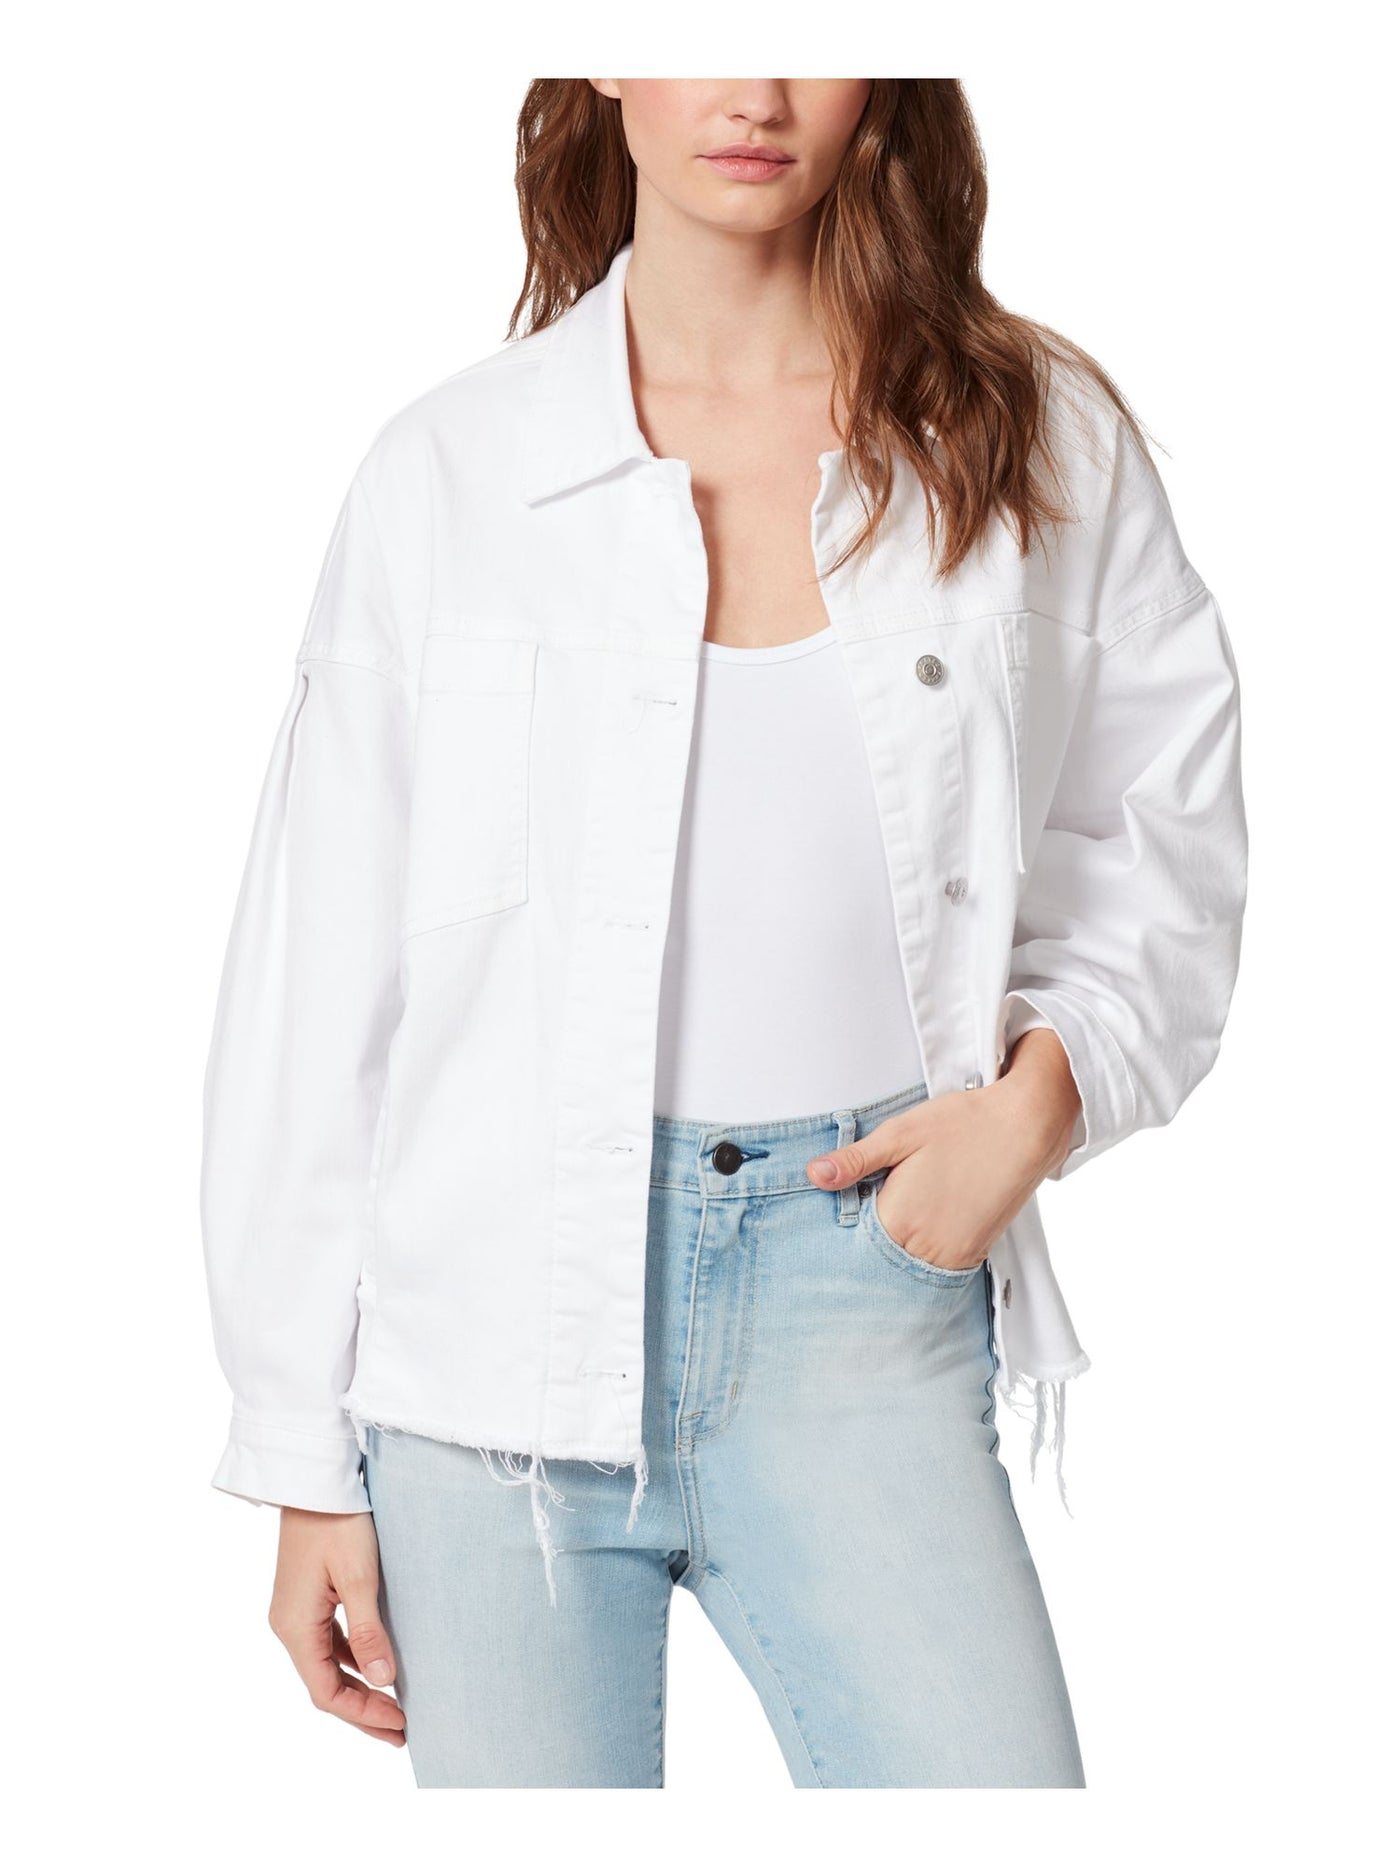 FRAYED JEANS Womens White Pocketed Point Collar Button Closure Denim Jacket M